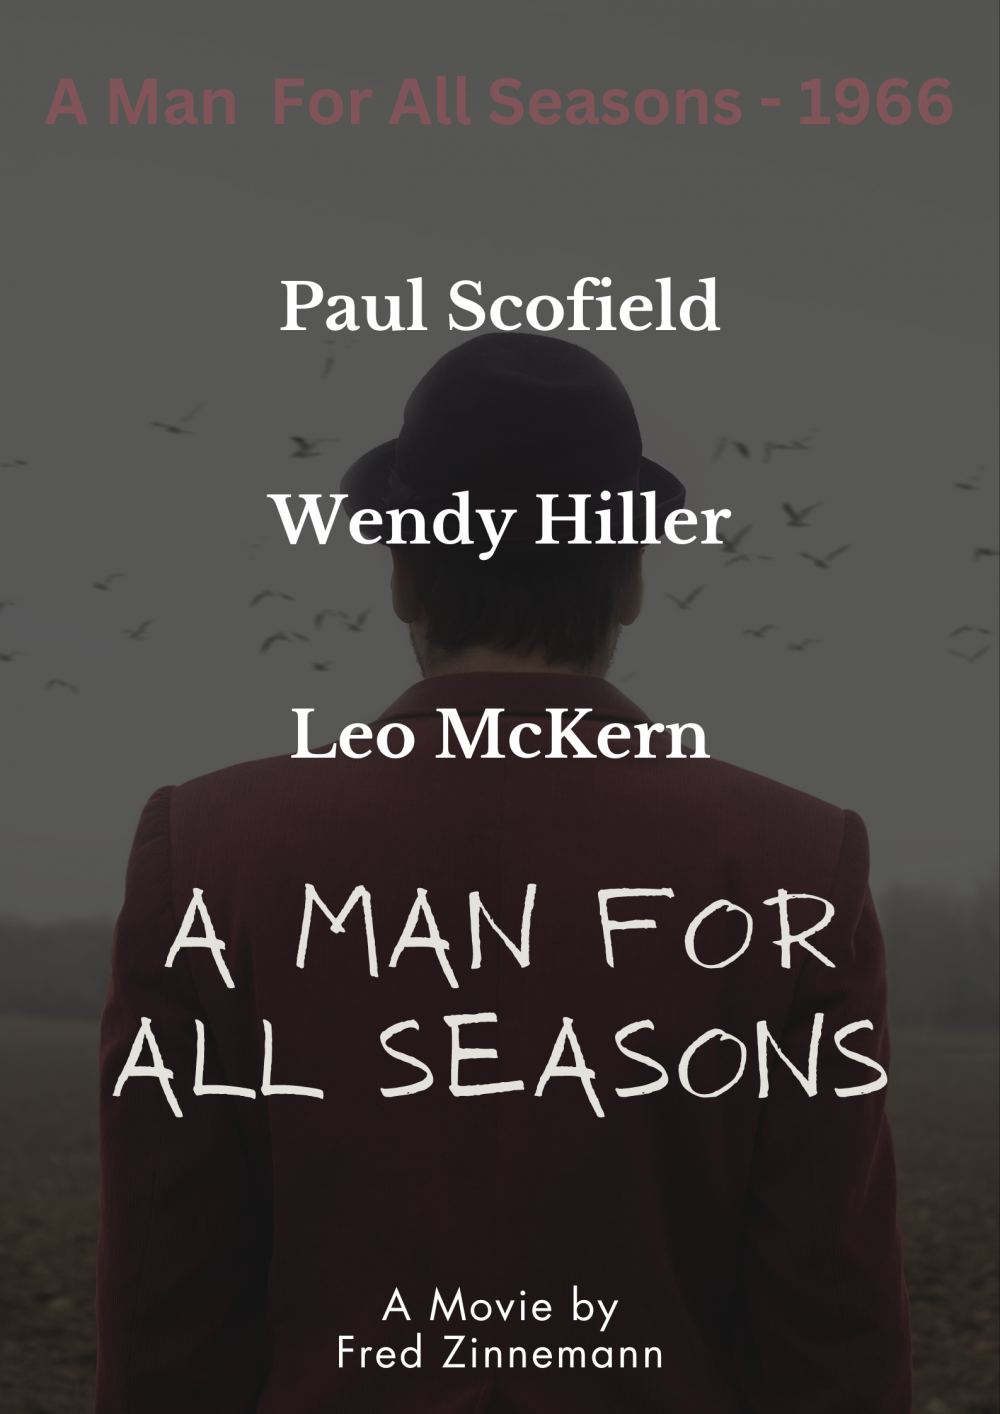 A Man for All Seasons - 1966